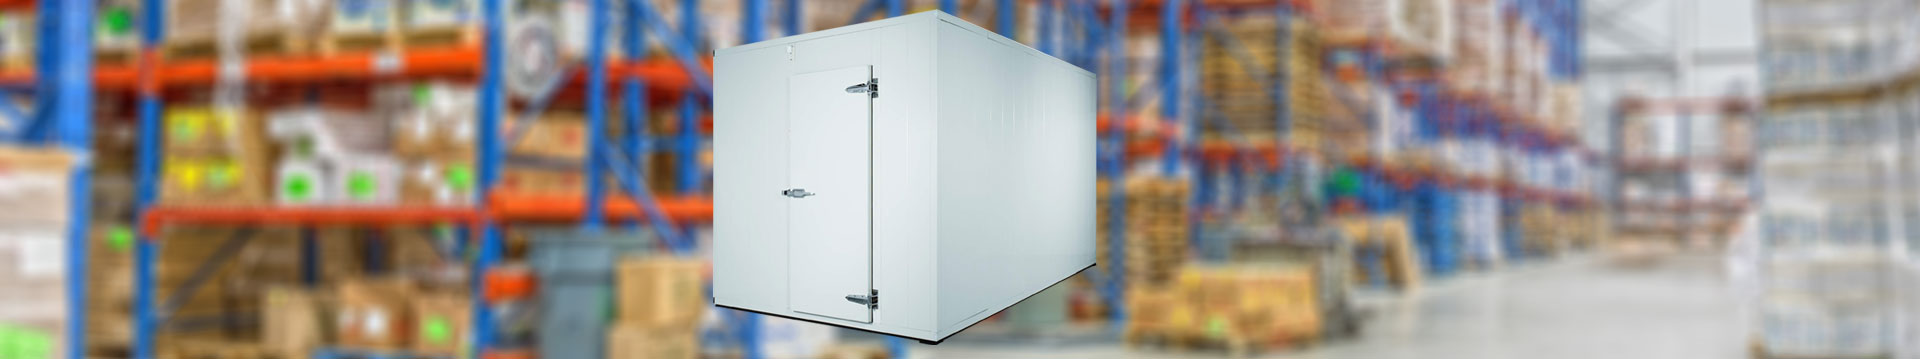 Monobloc Cooling Devices | Refrigeration Unit For Cold Room